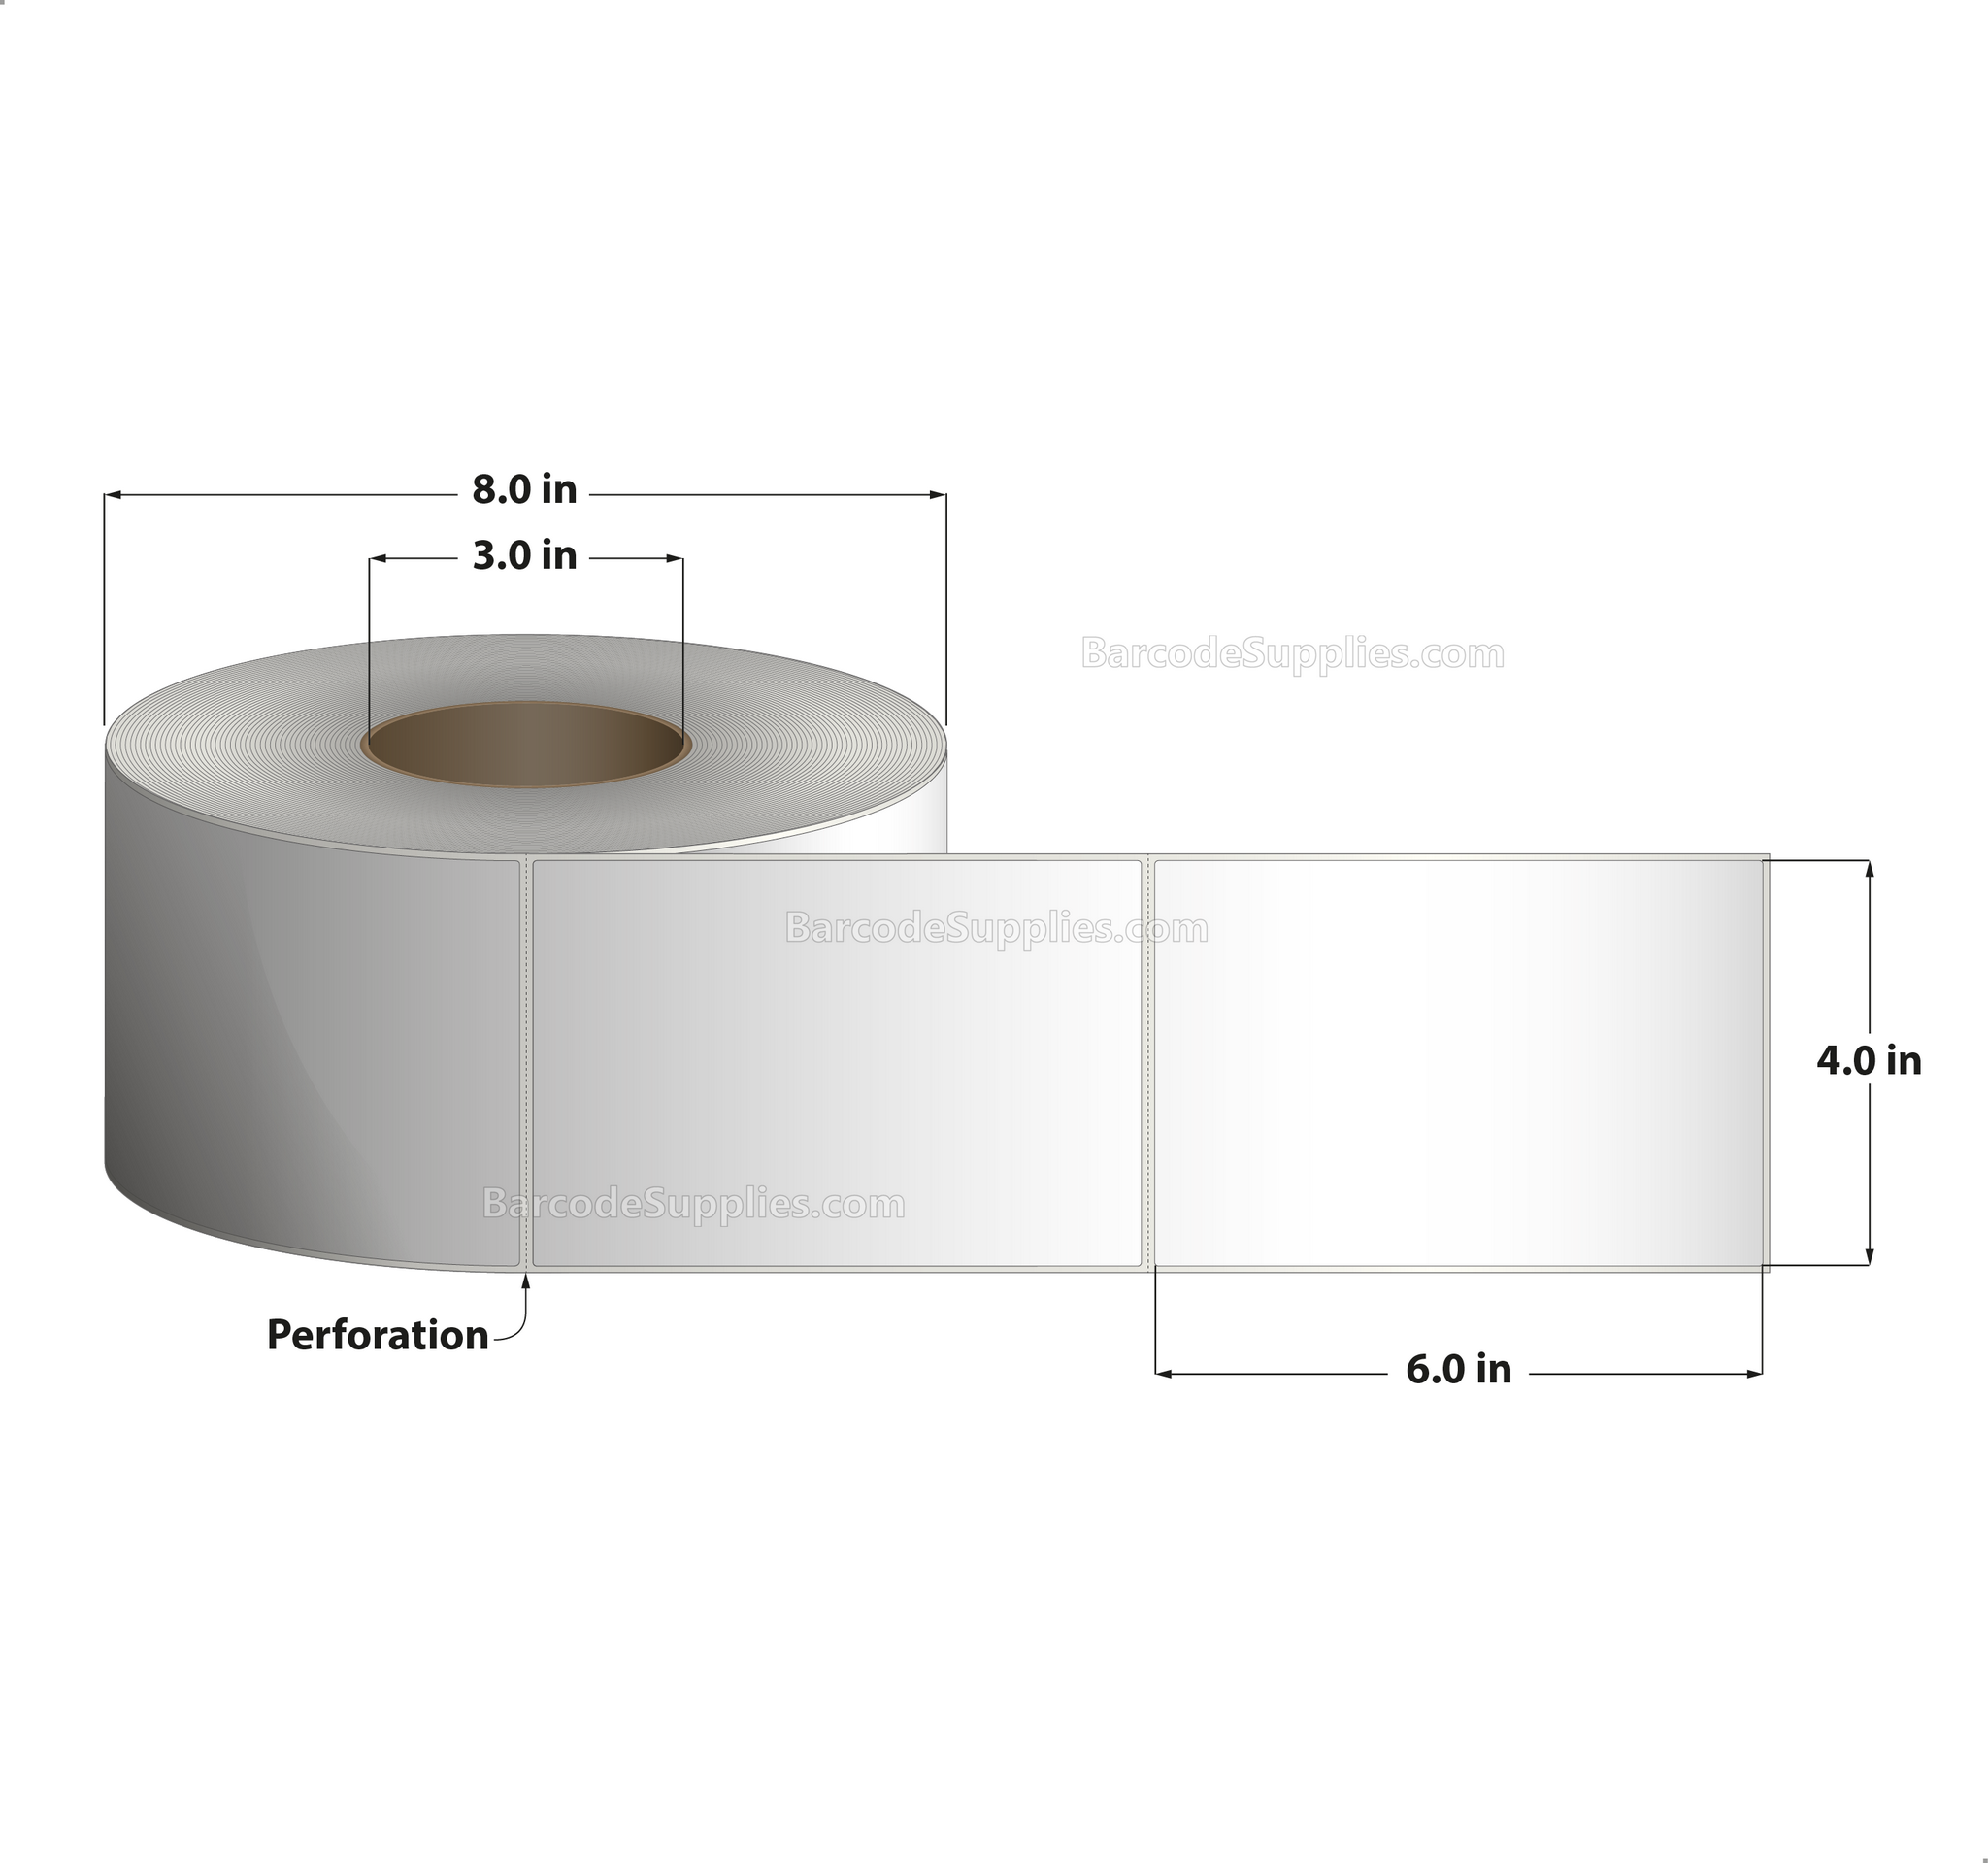 4 x 6 Thermal Transfer White Labels With Adhesive - Perforated - 900 Labels Per Roll - Carton Of 4 Rolls - 3600 Labels Total - MPN: THKD46-1P